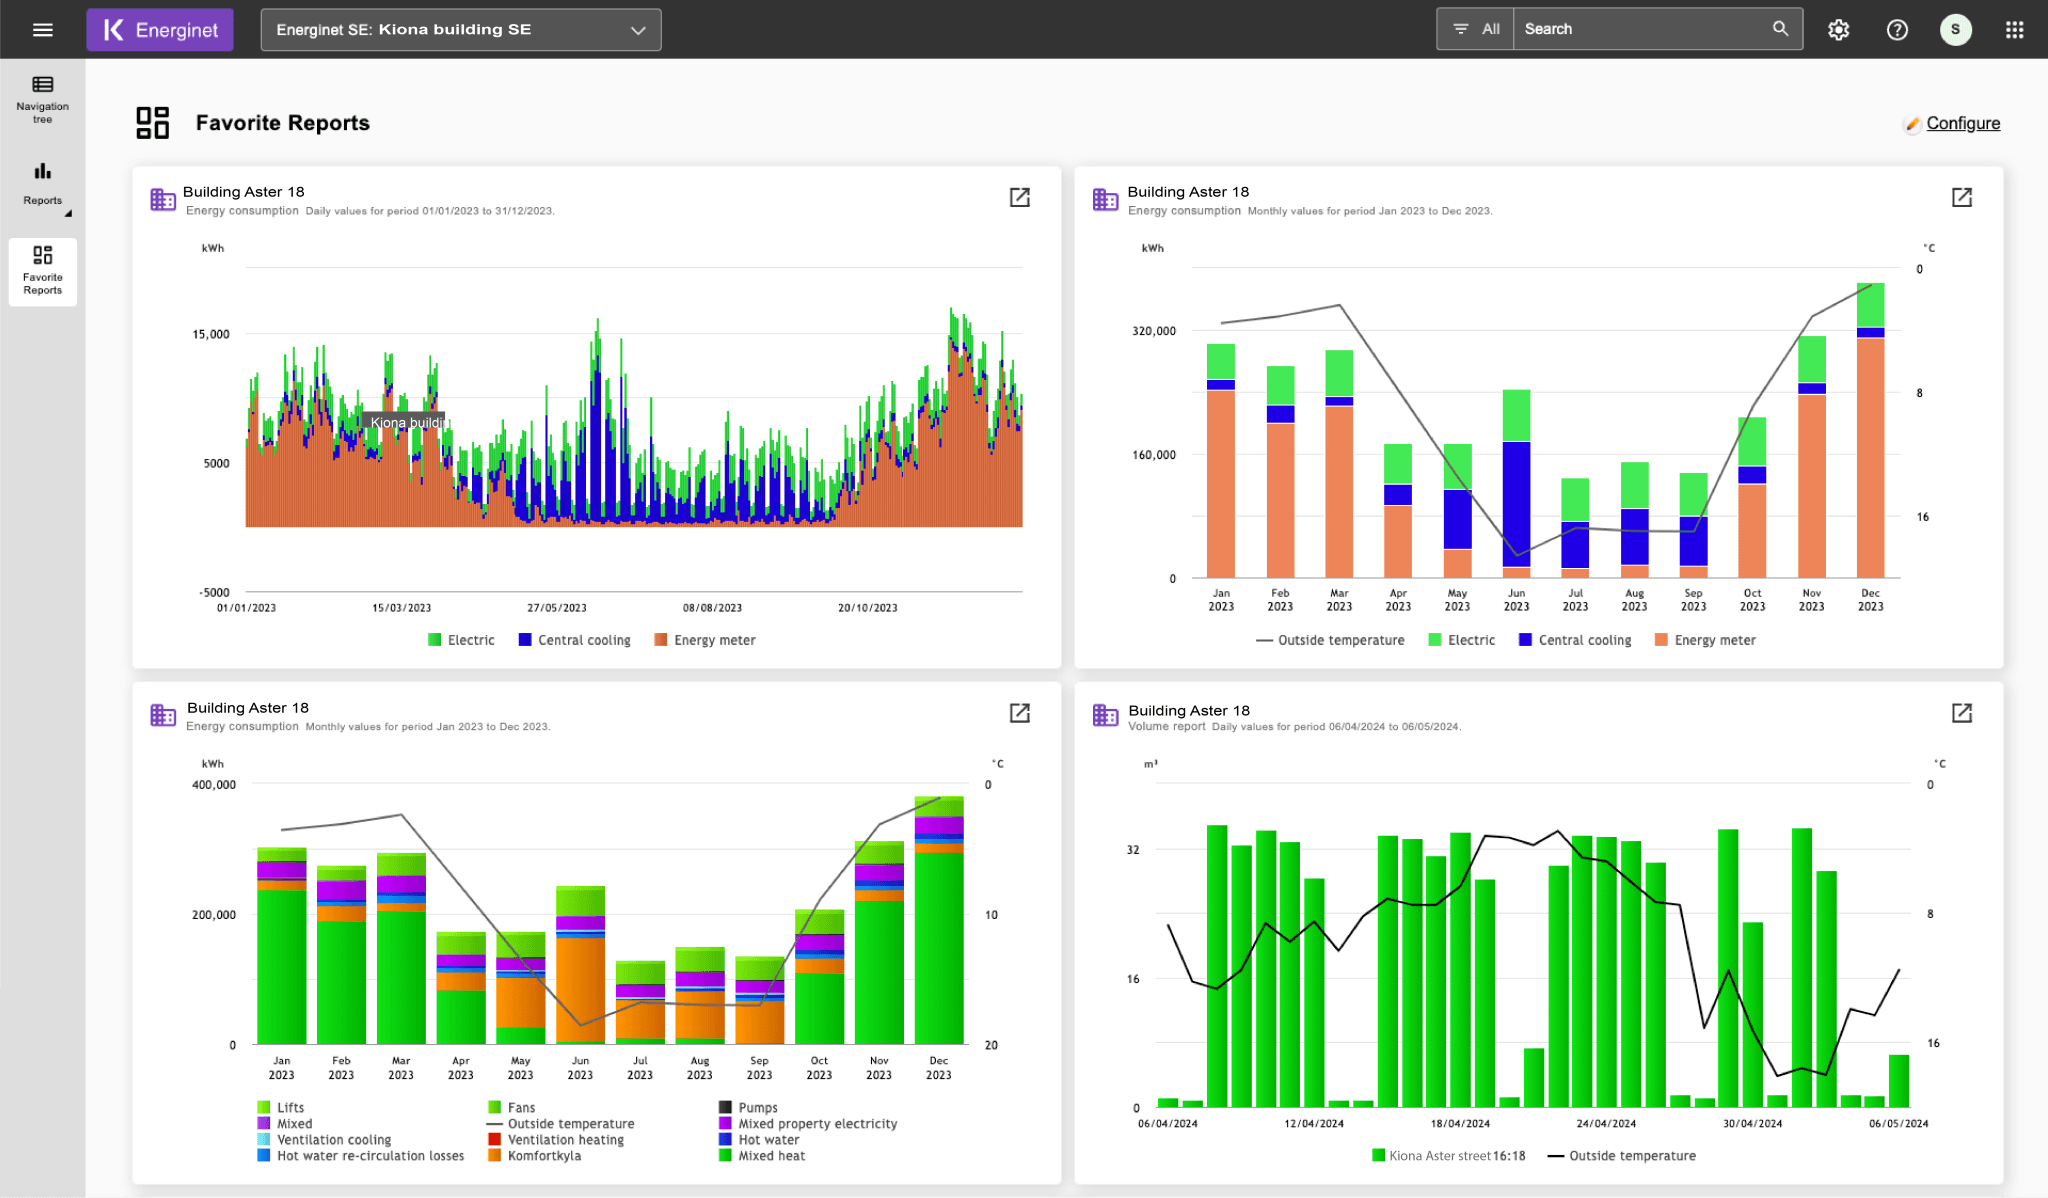 Track your energy efficiency and sustainability goals with the Energinet dashboards